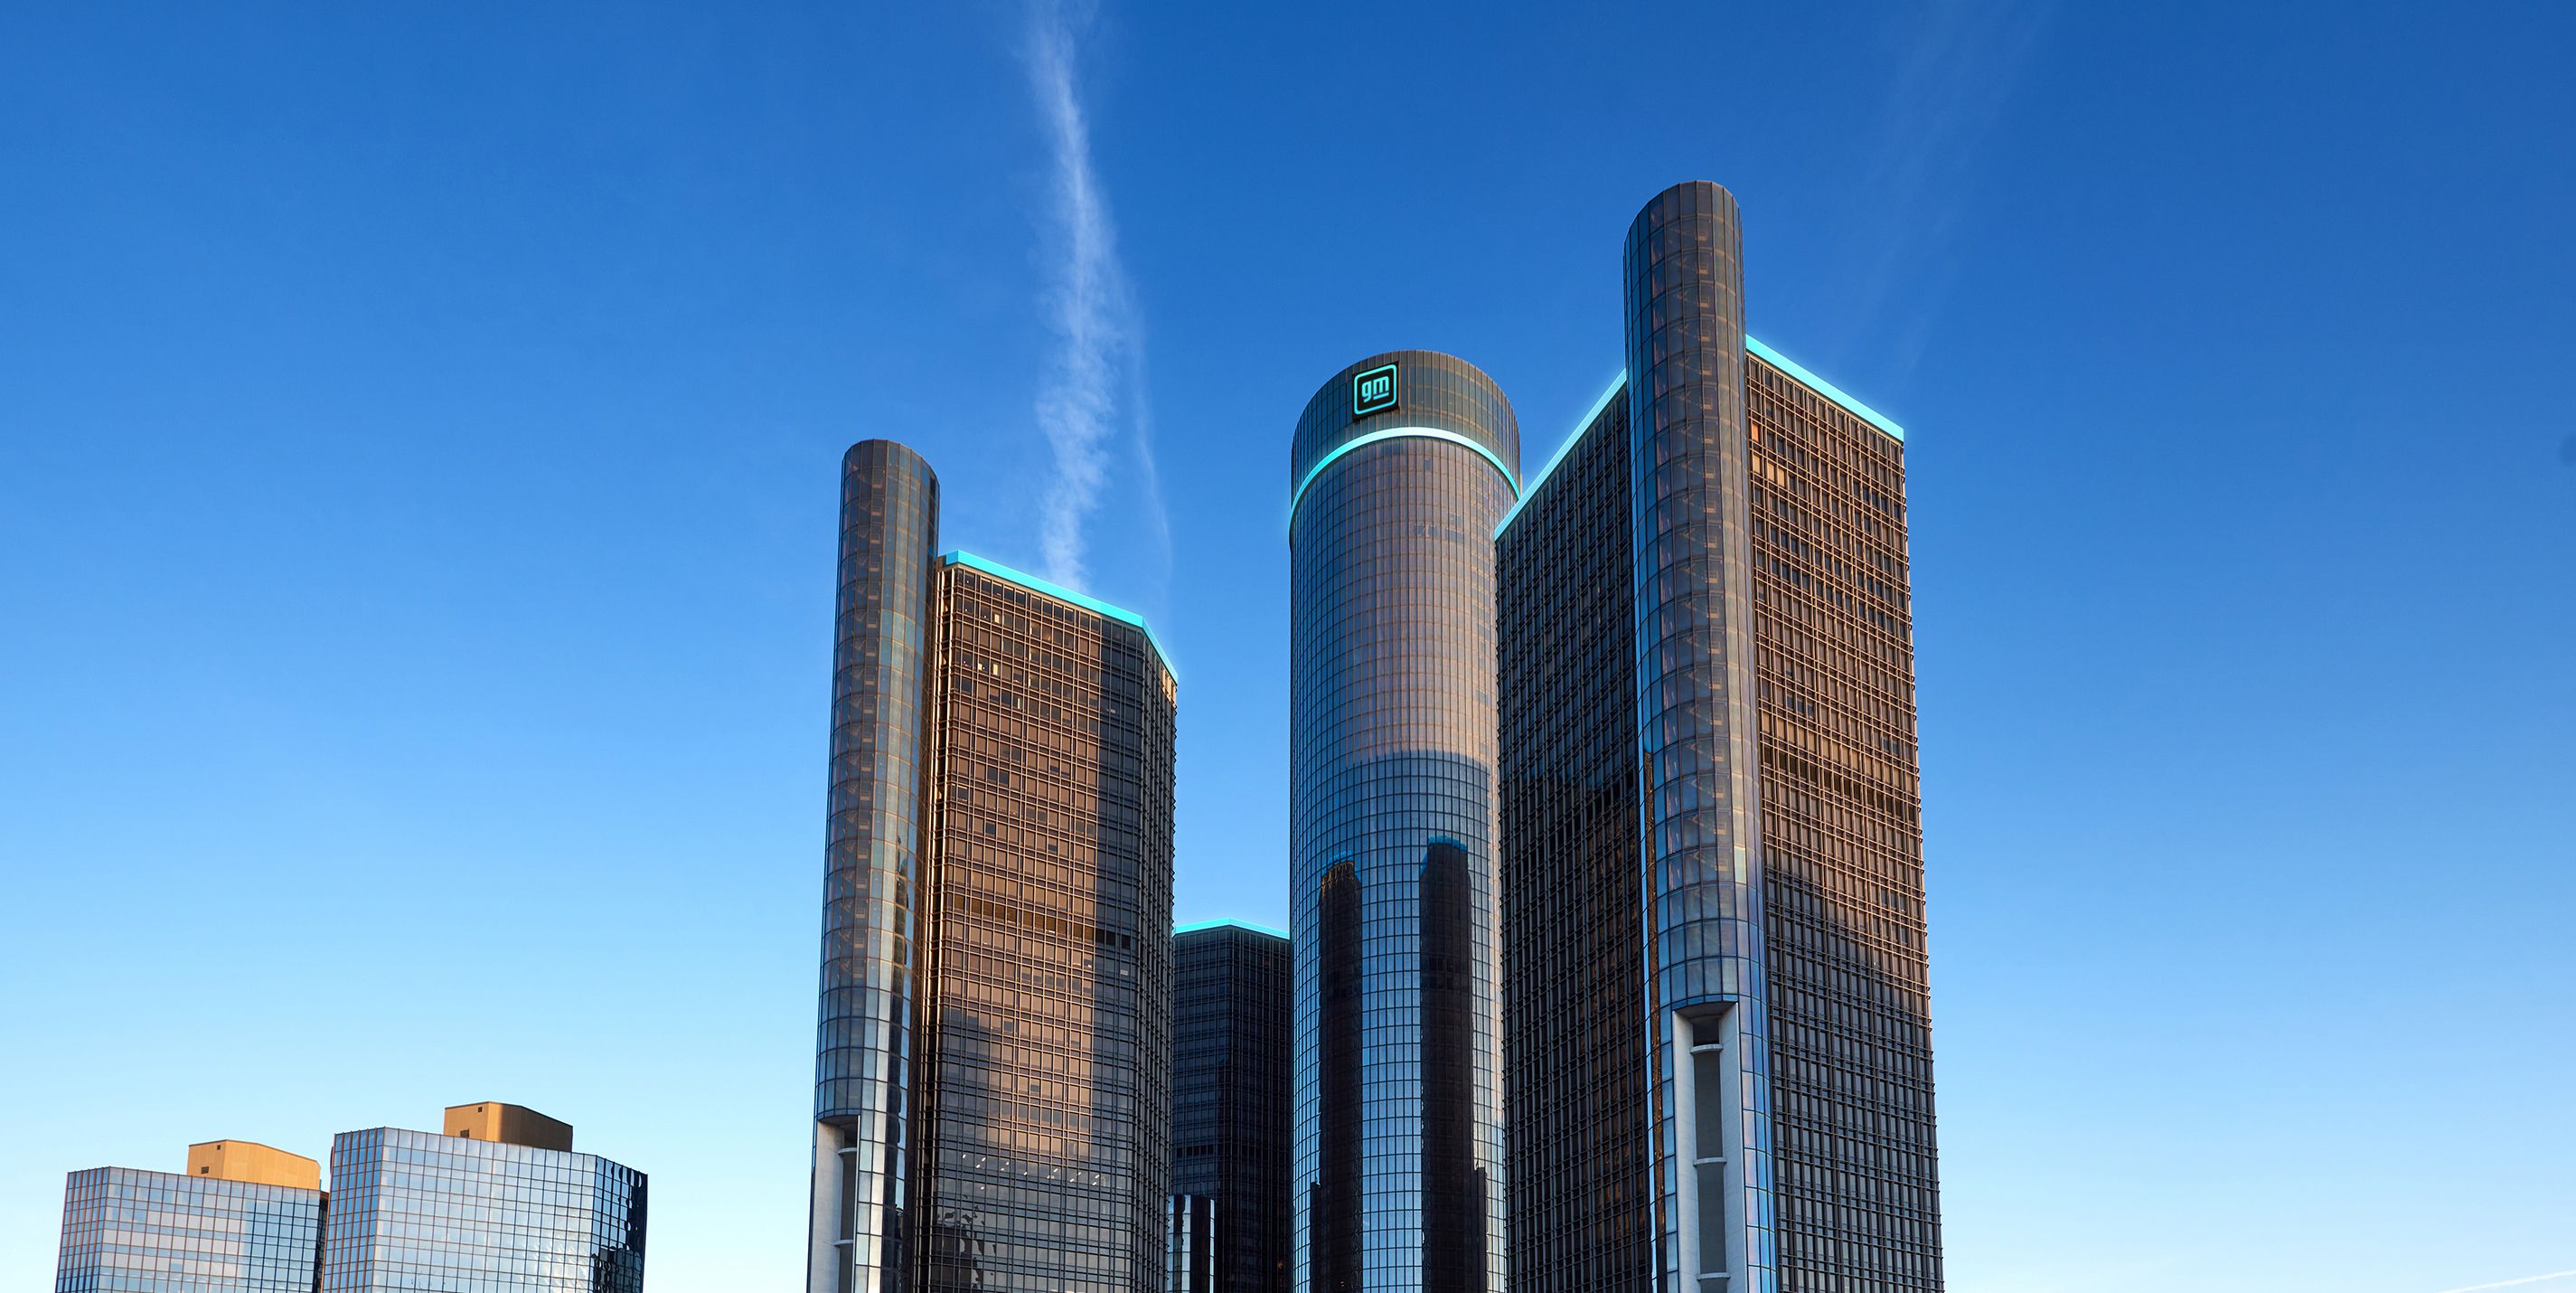 General Motors Is Moving from the RenCen but Staying in Detroit